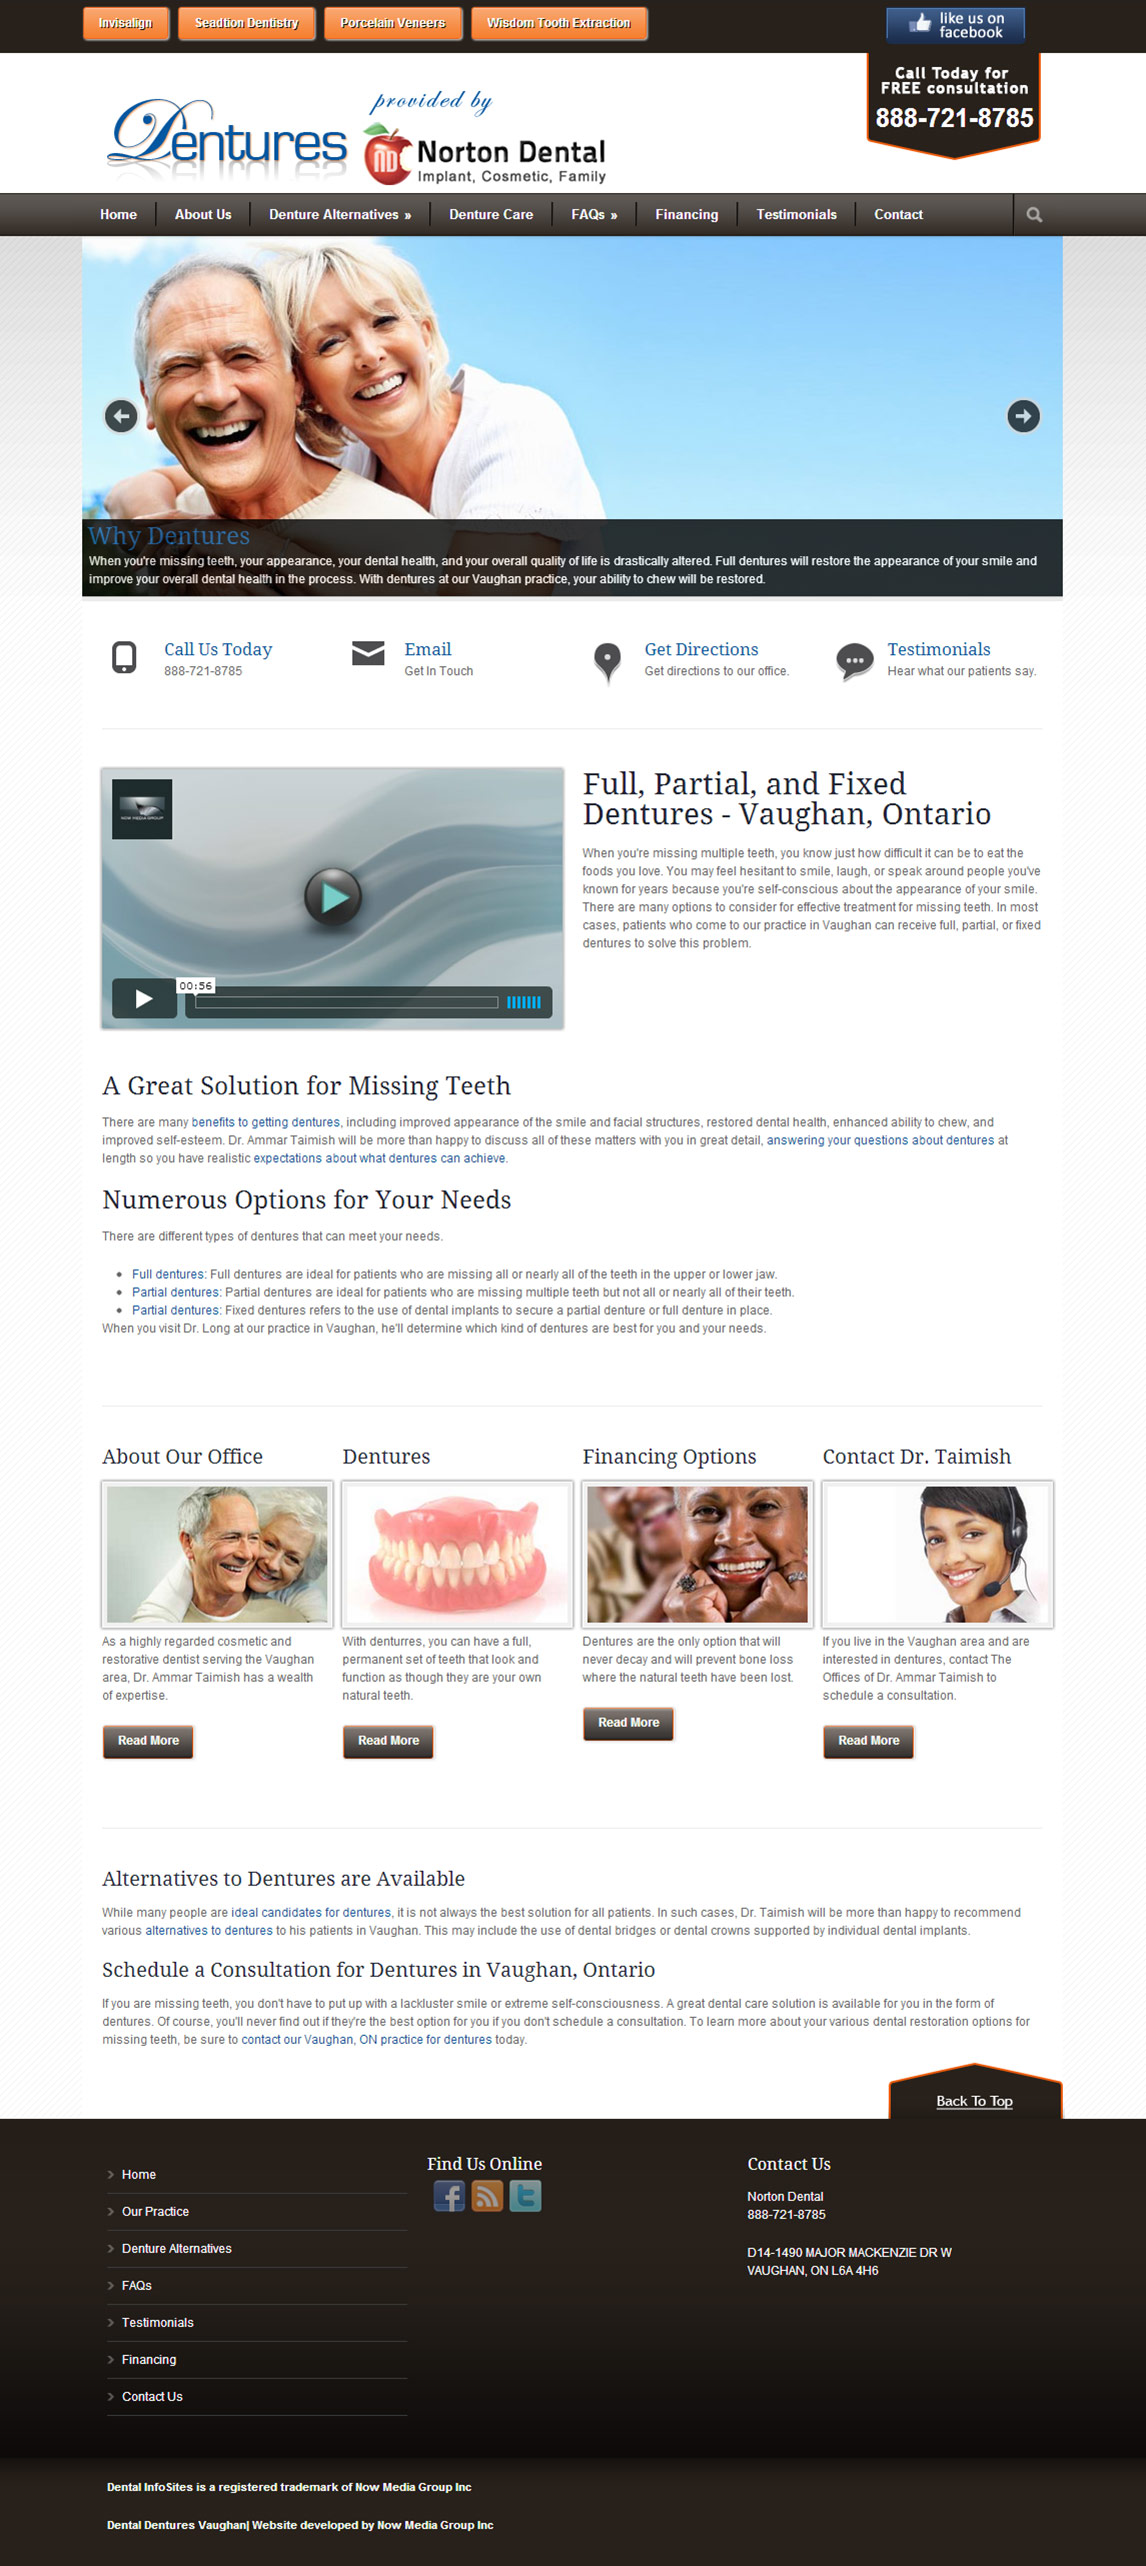 Dentures InfoSite by Now Media Group